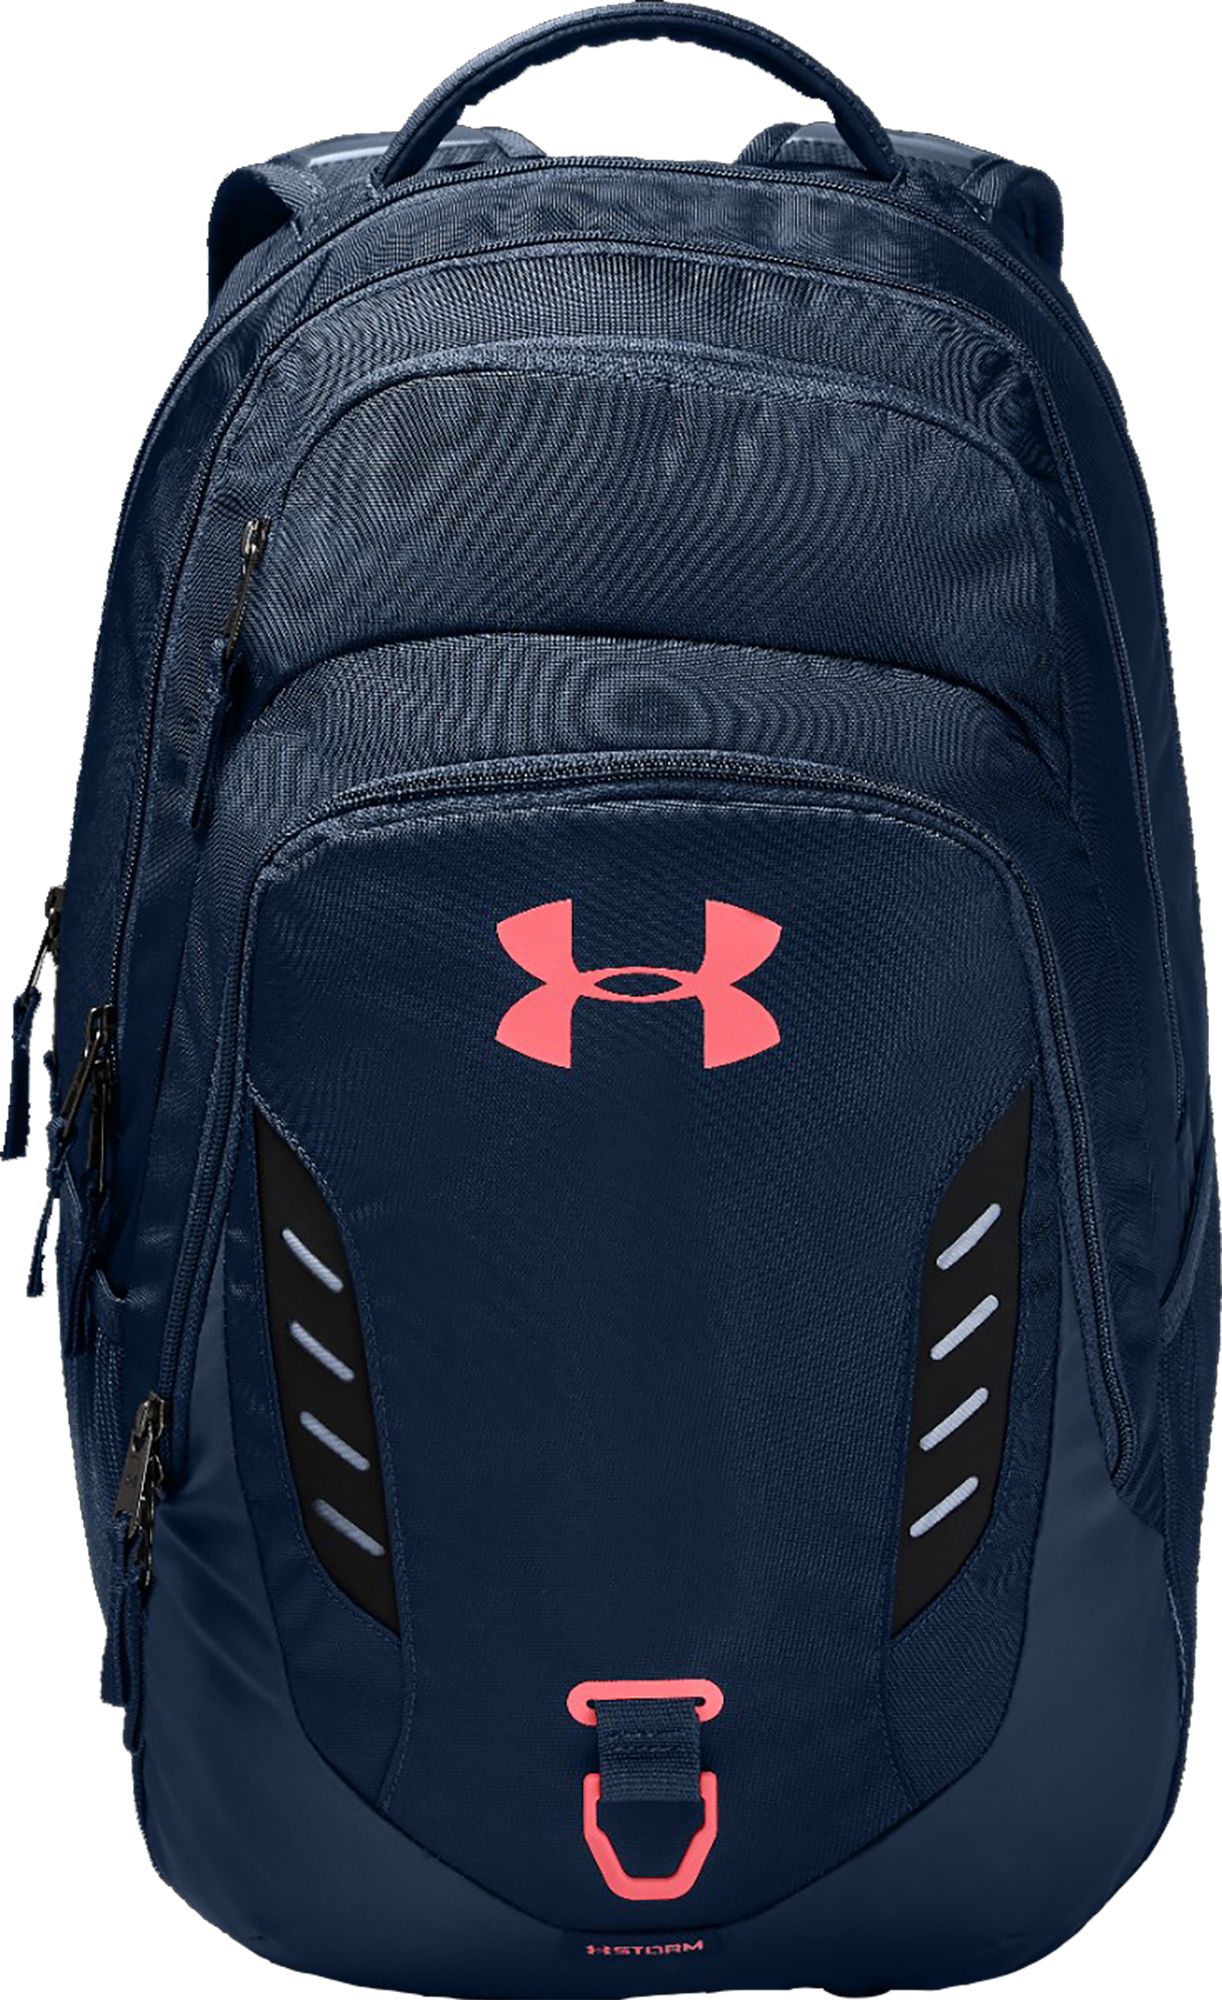 under armour backpack rn 96510